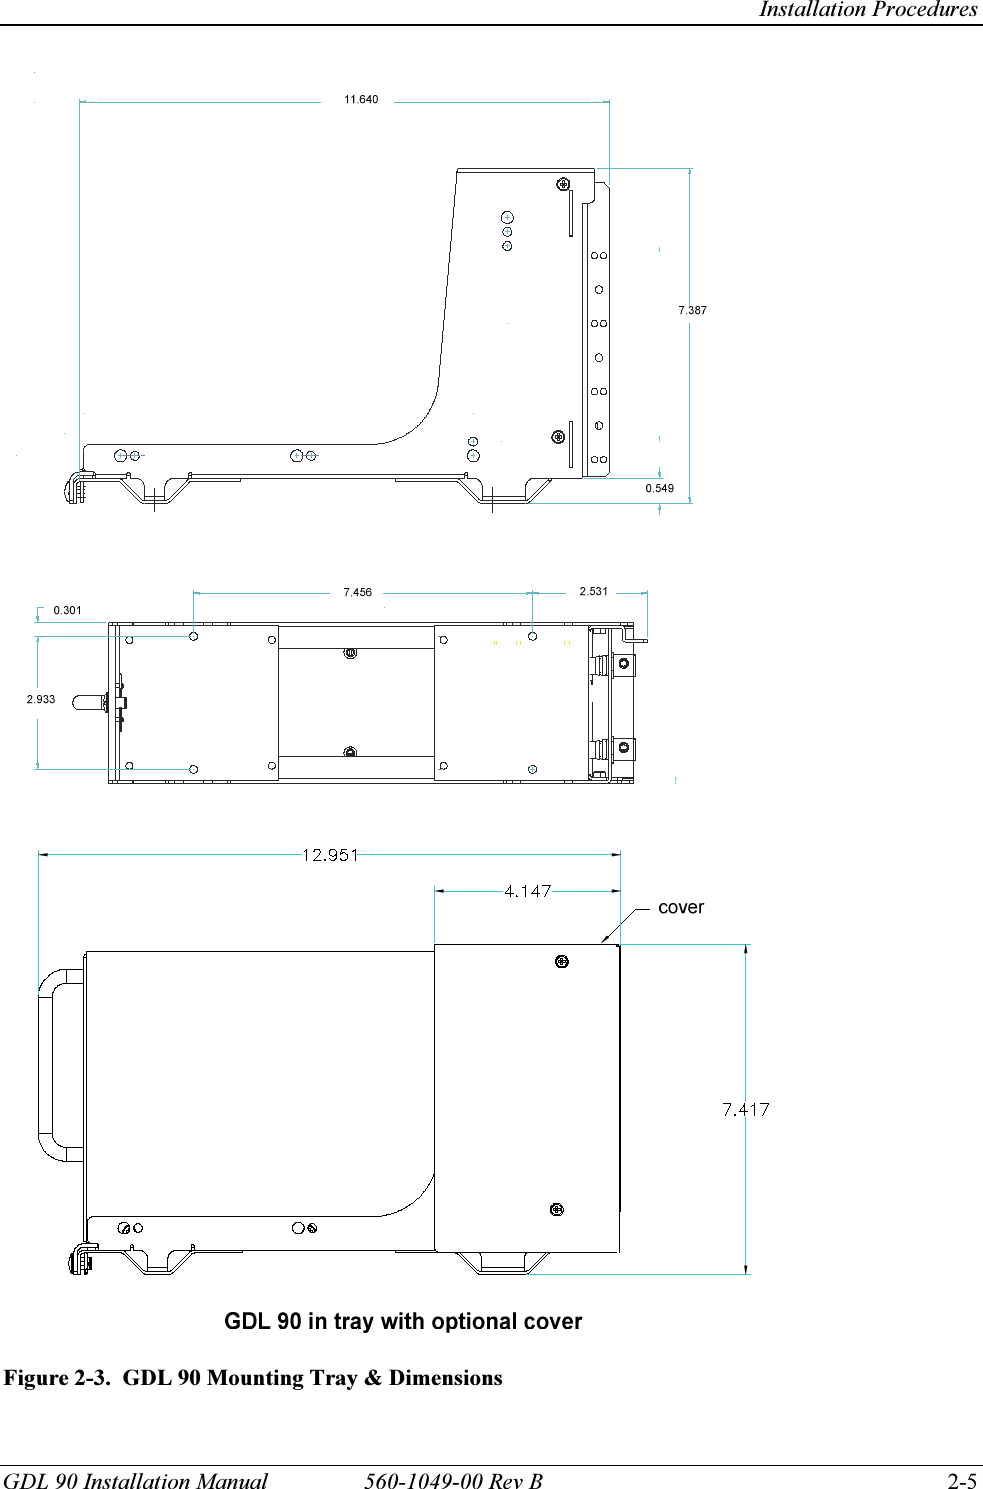   Installation Procedures GDL 90 Installation Manual  560-1049-00 Rev B    2-5  Figure 2-3.  GDL 90 Mounting Tray &amp; Dimensions 